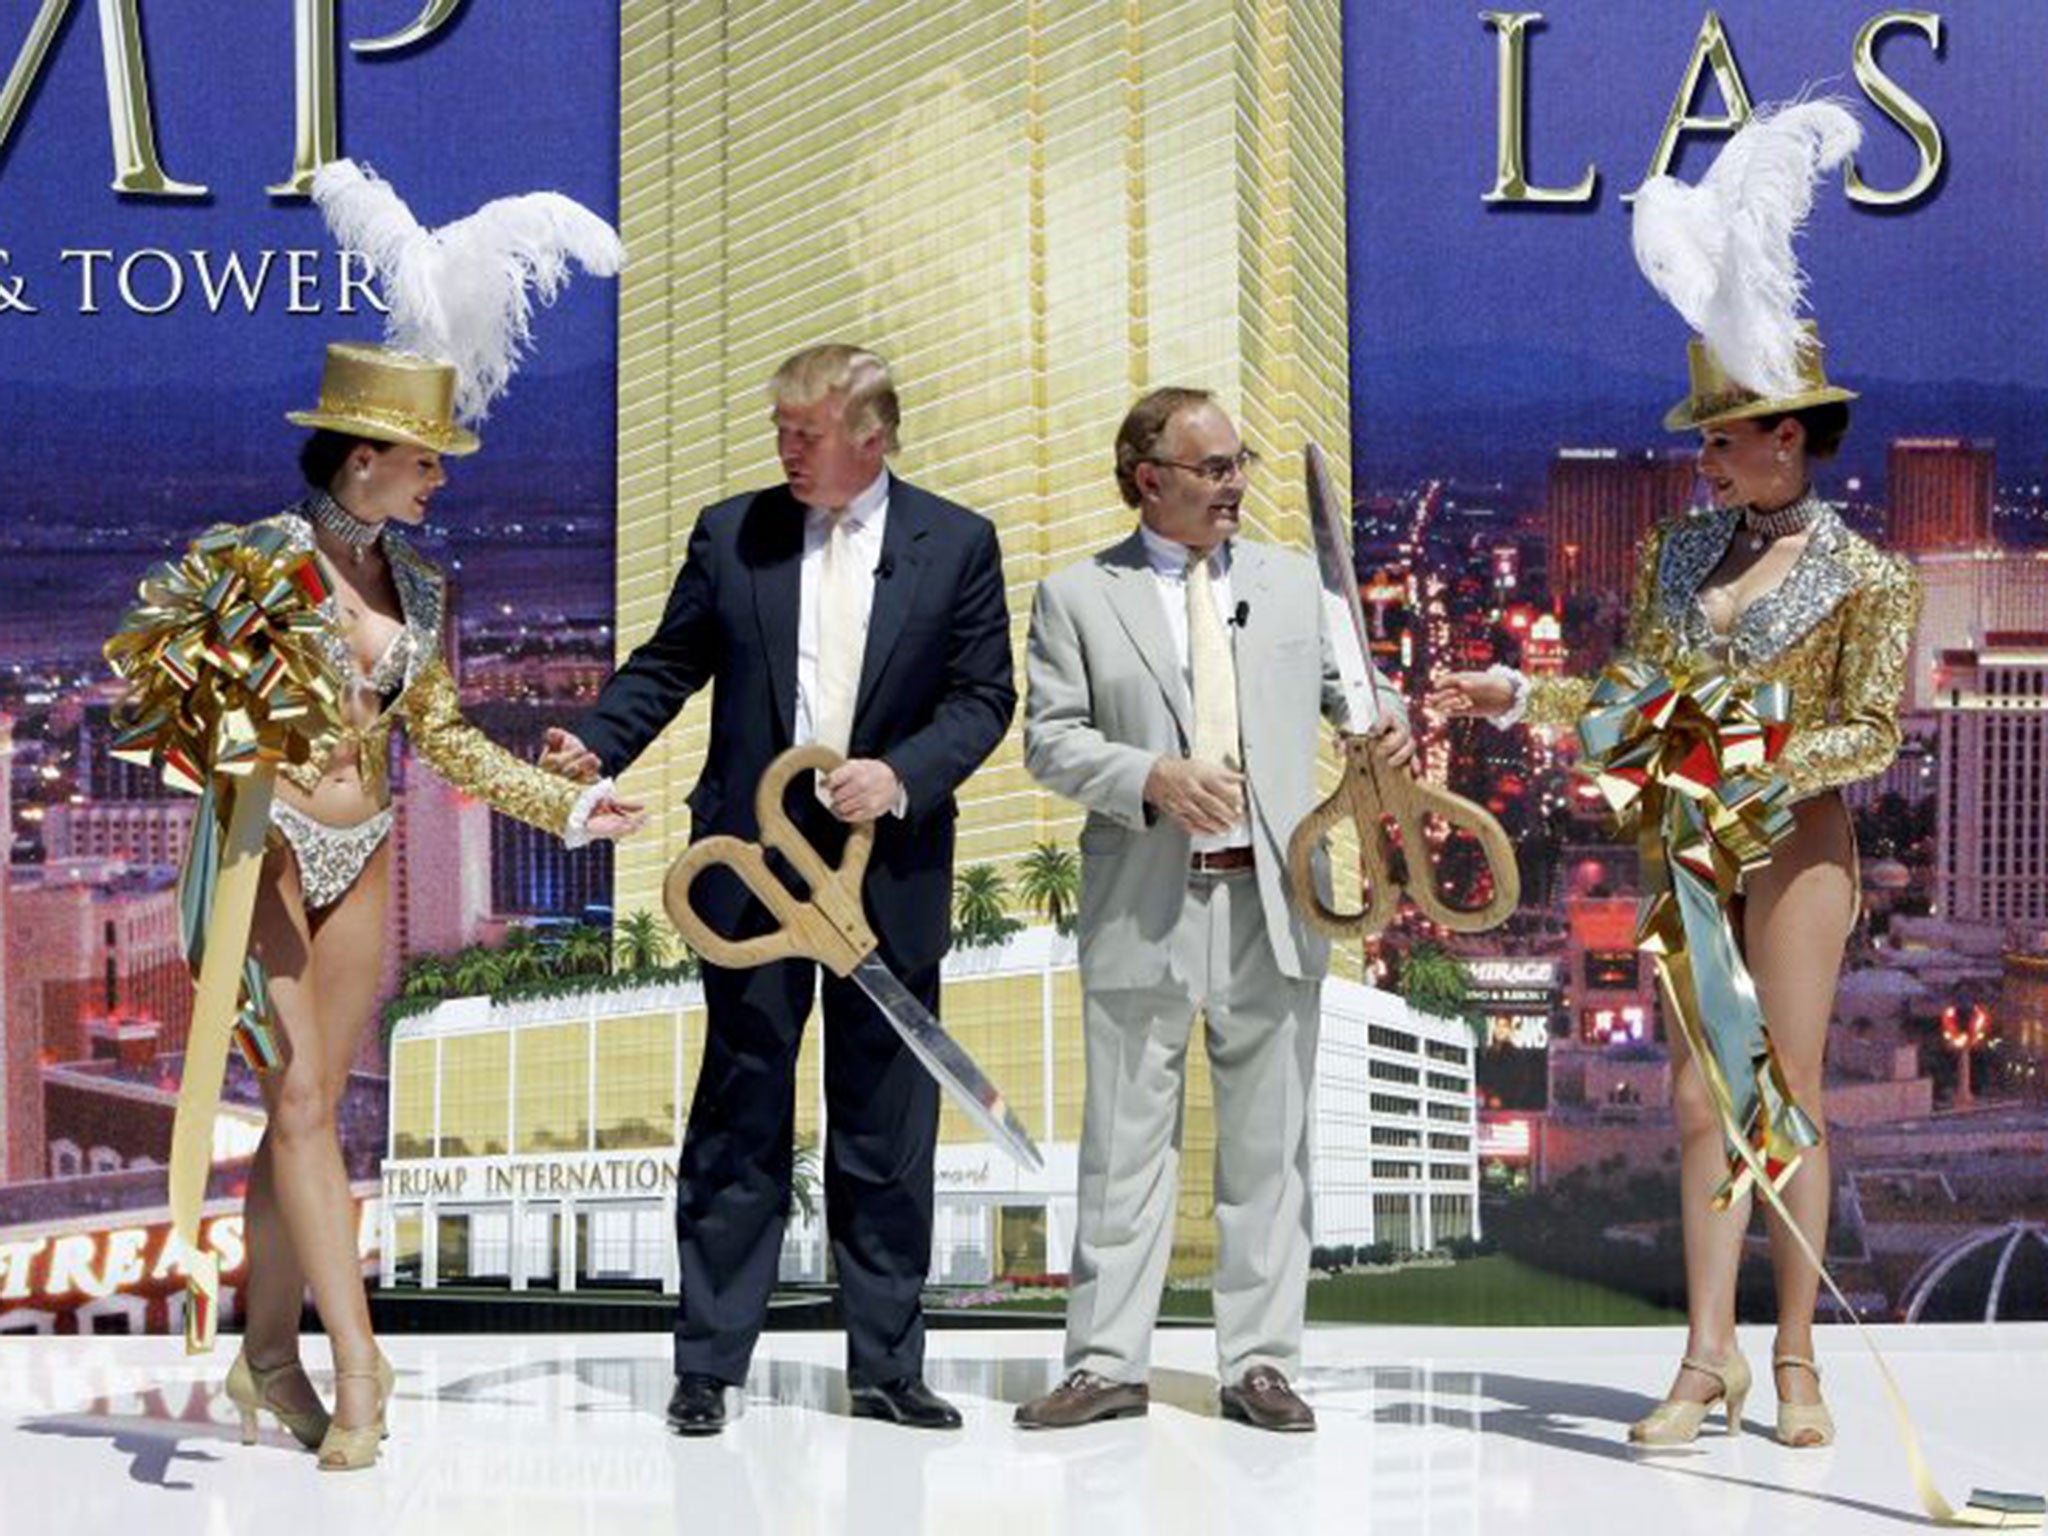 Donald Trump with Trump Tower co-owner Phillip Ruffin in Las Vegas in 2005